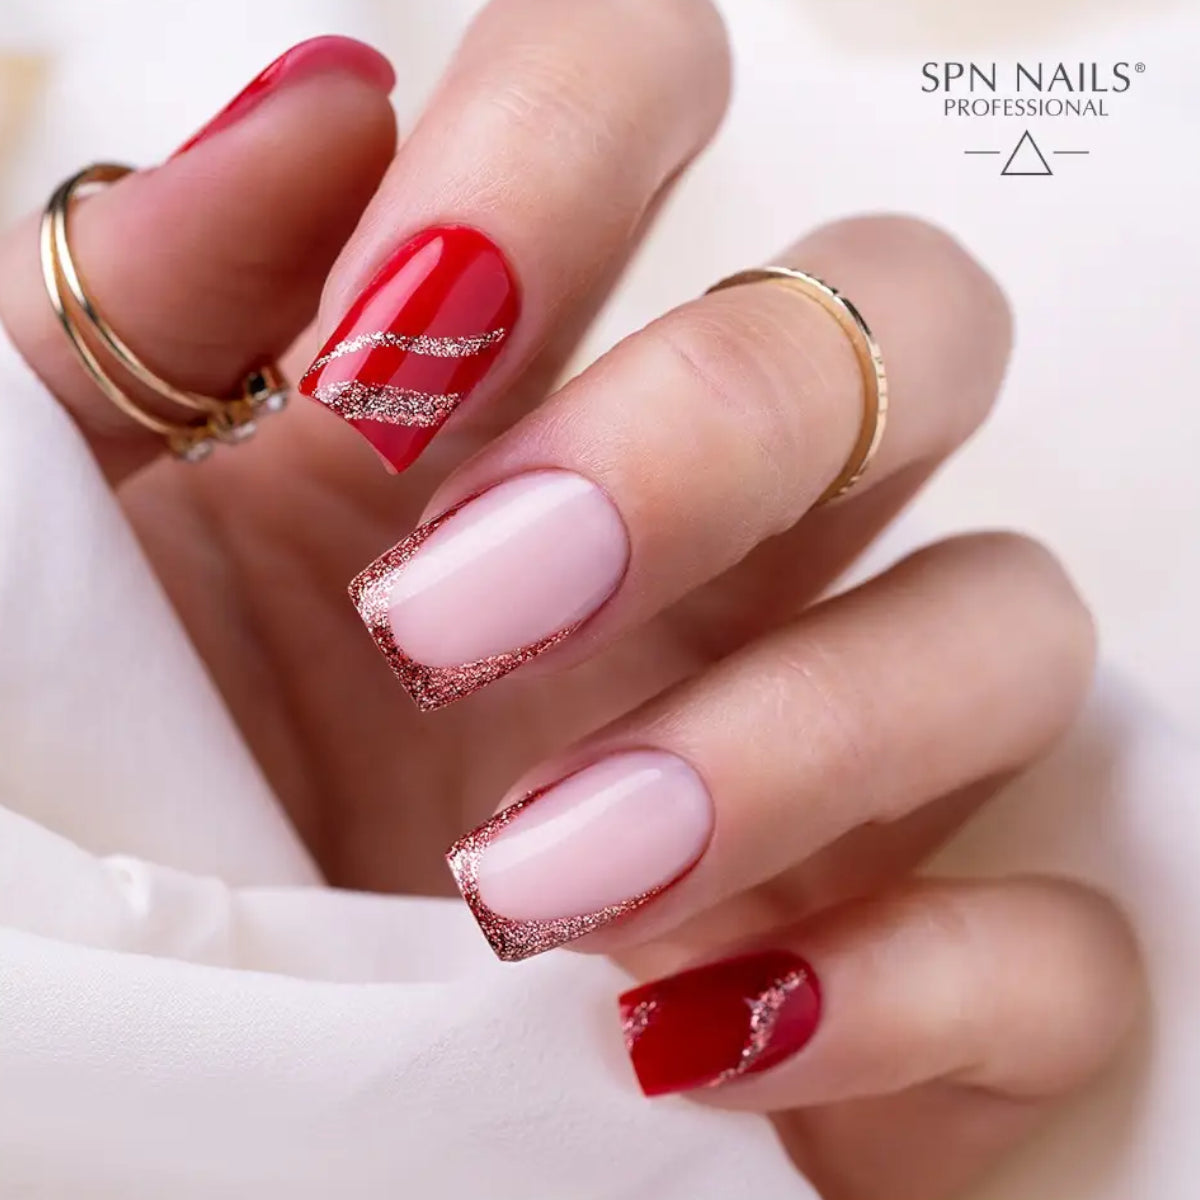 SPN Nails Metal Gel No.6 Canyon Red Nail Gliter Styling